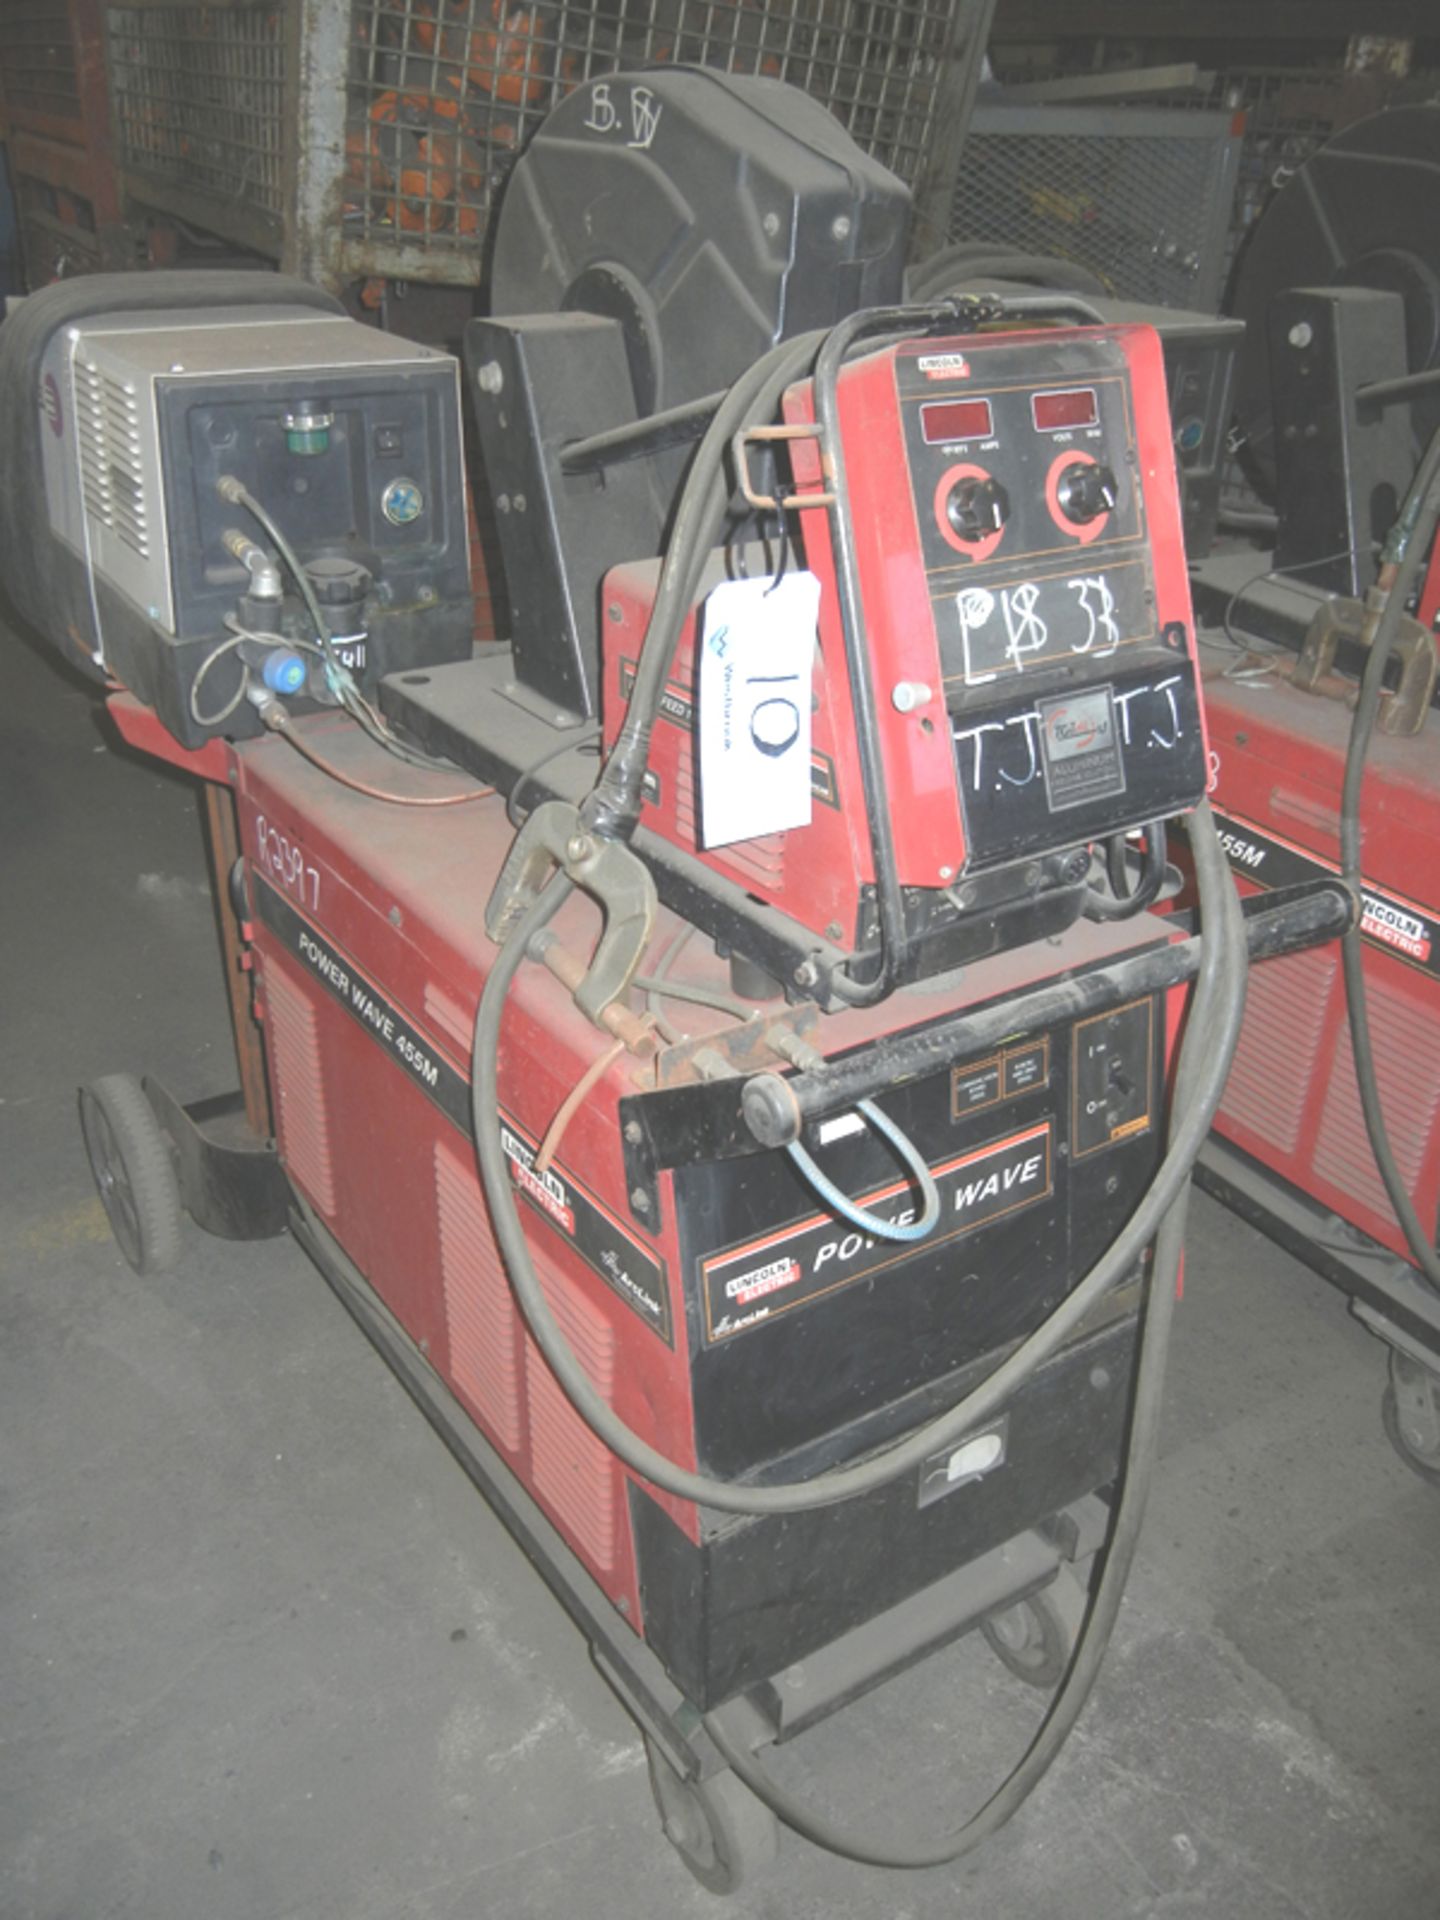 Lincoln Model 455 Welder with Lincoln power feed 10m wire feeder & Chiller, 208/230/460/575 volt